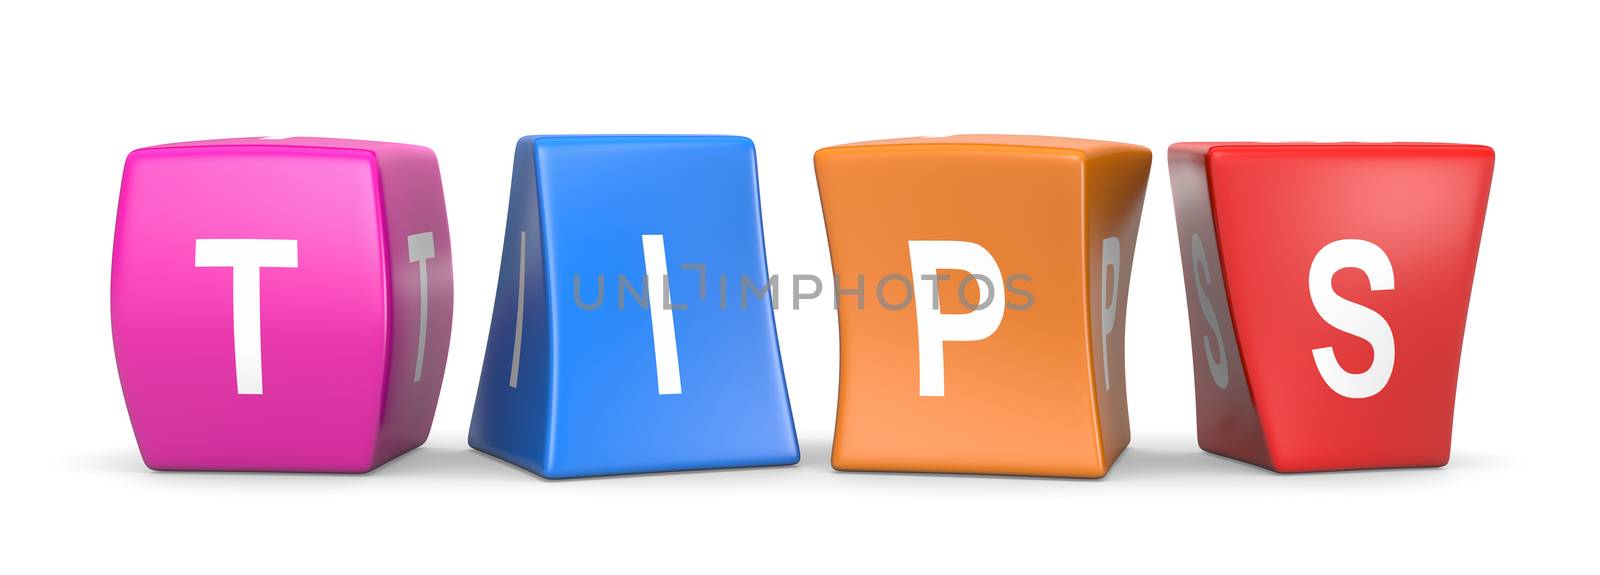 Tips White Text on Colorful Deformed Funny Cubes 3D Illustration on White Background